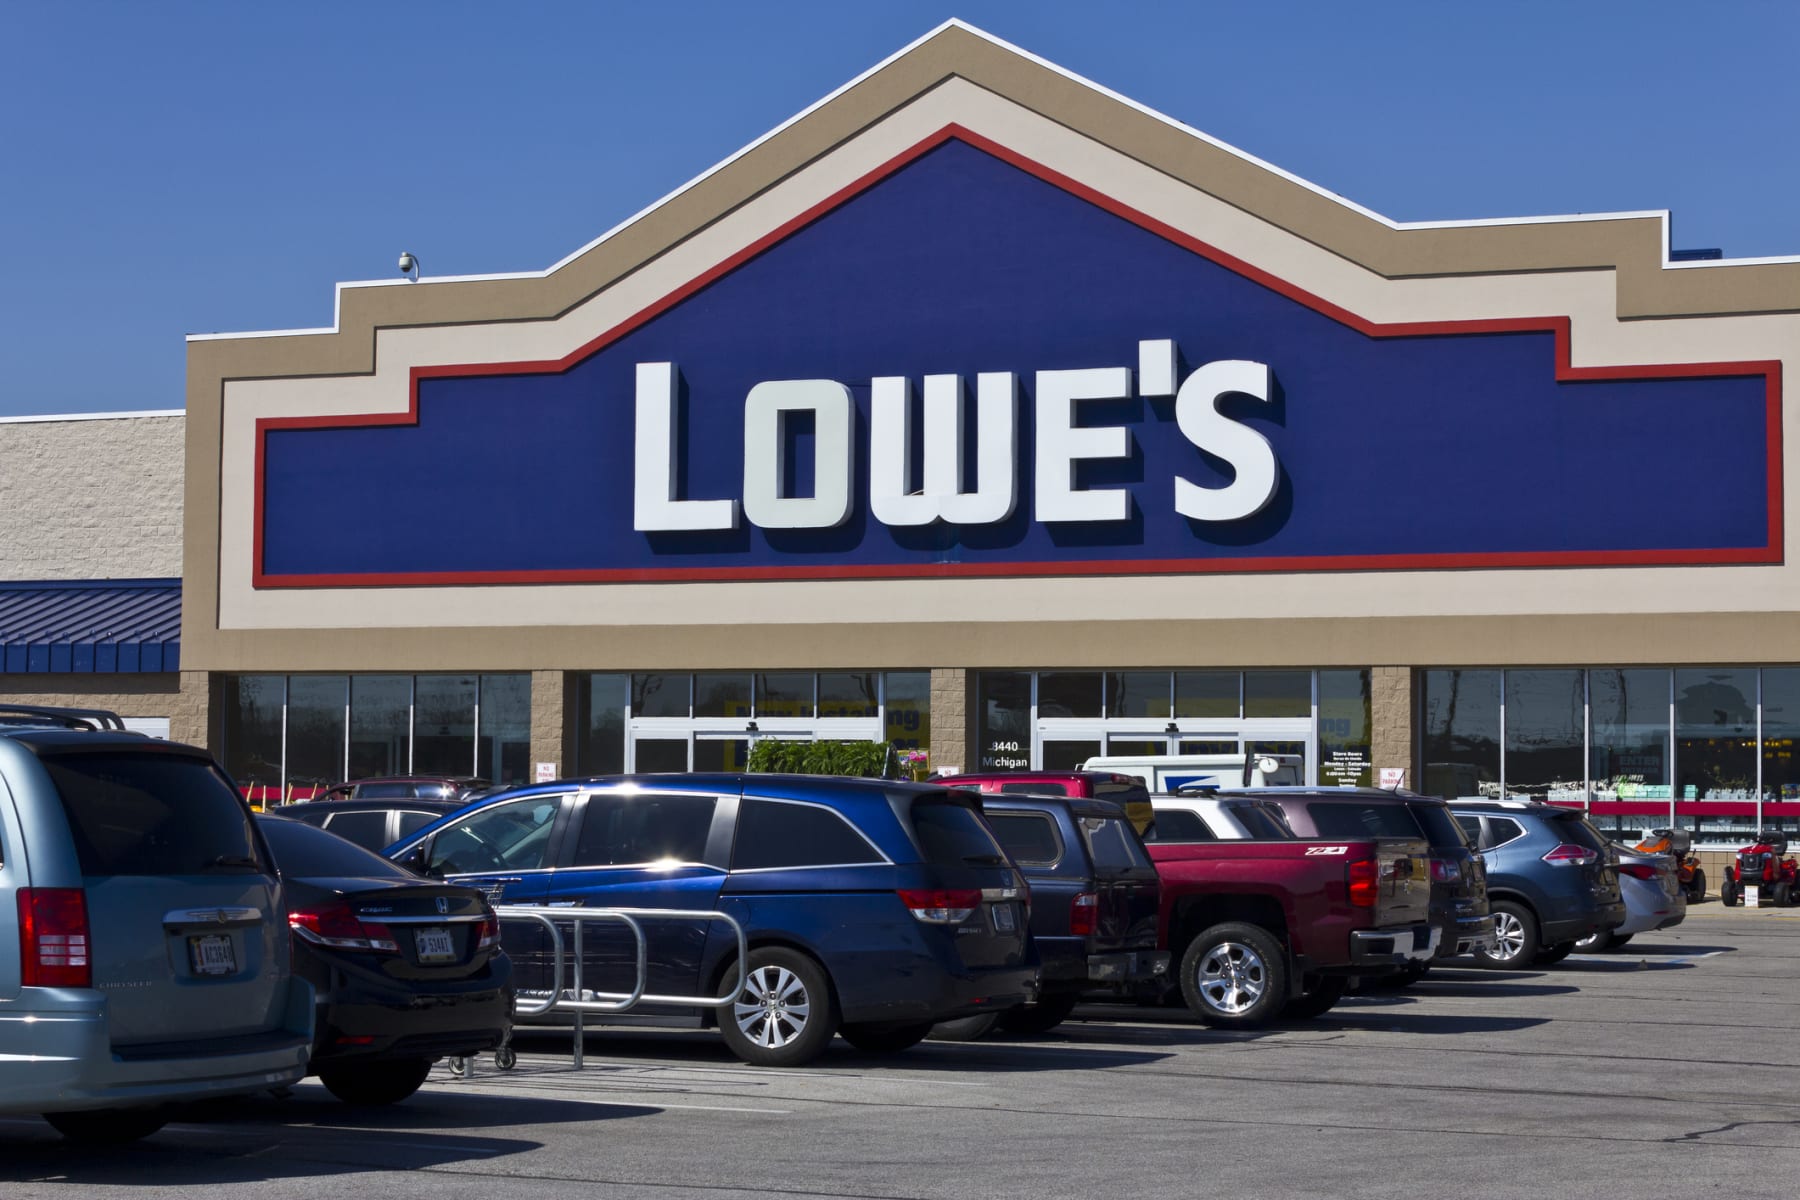 A Lowe's storefront in Indianapolis.